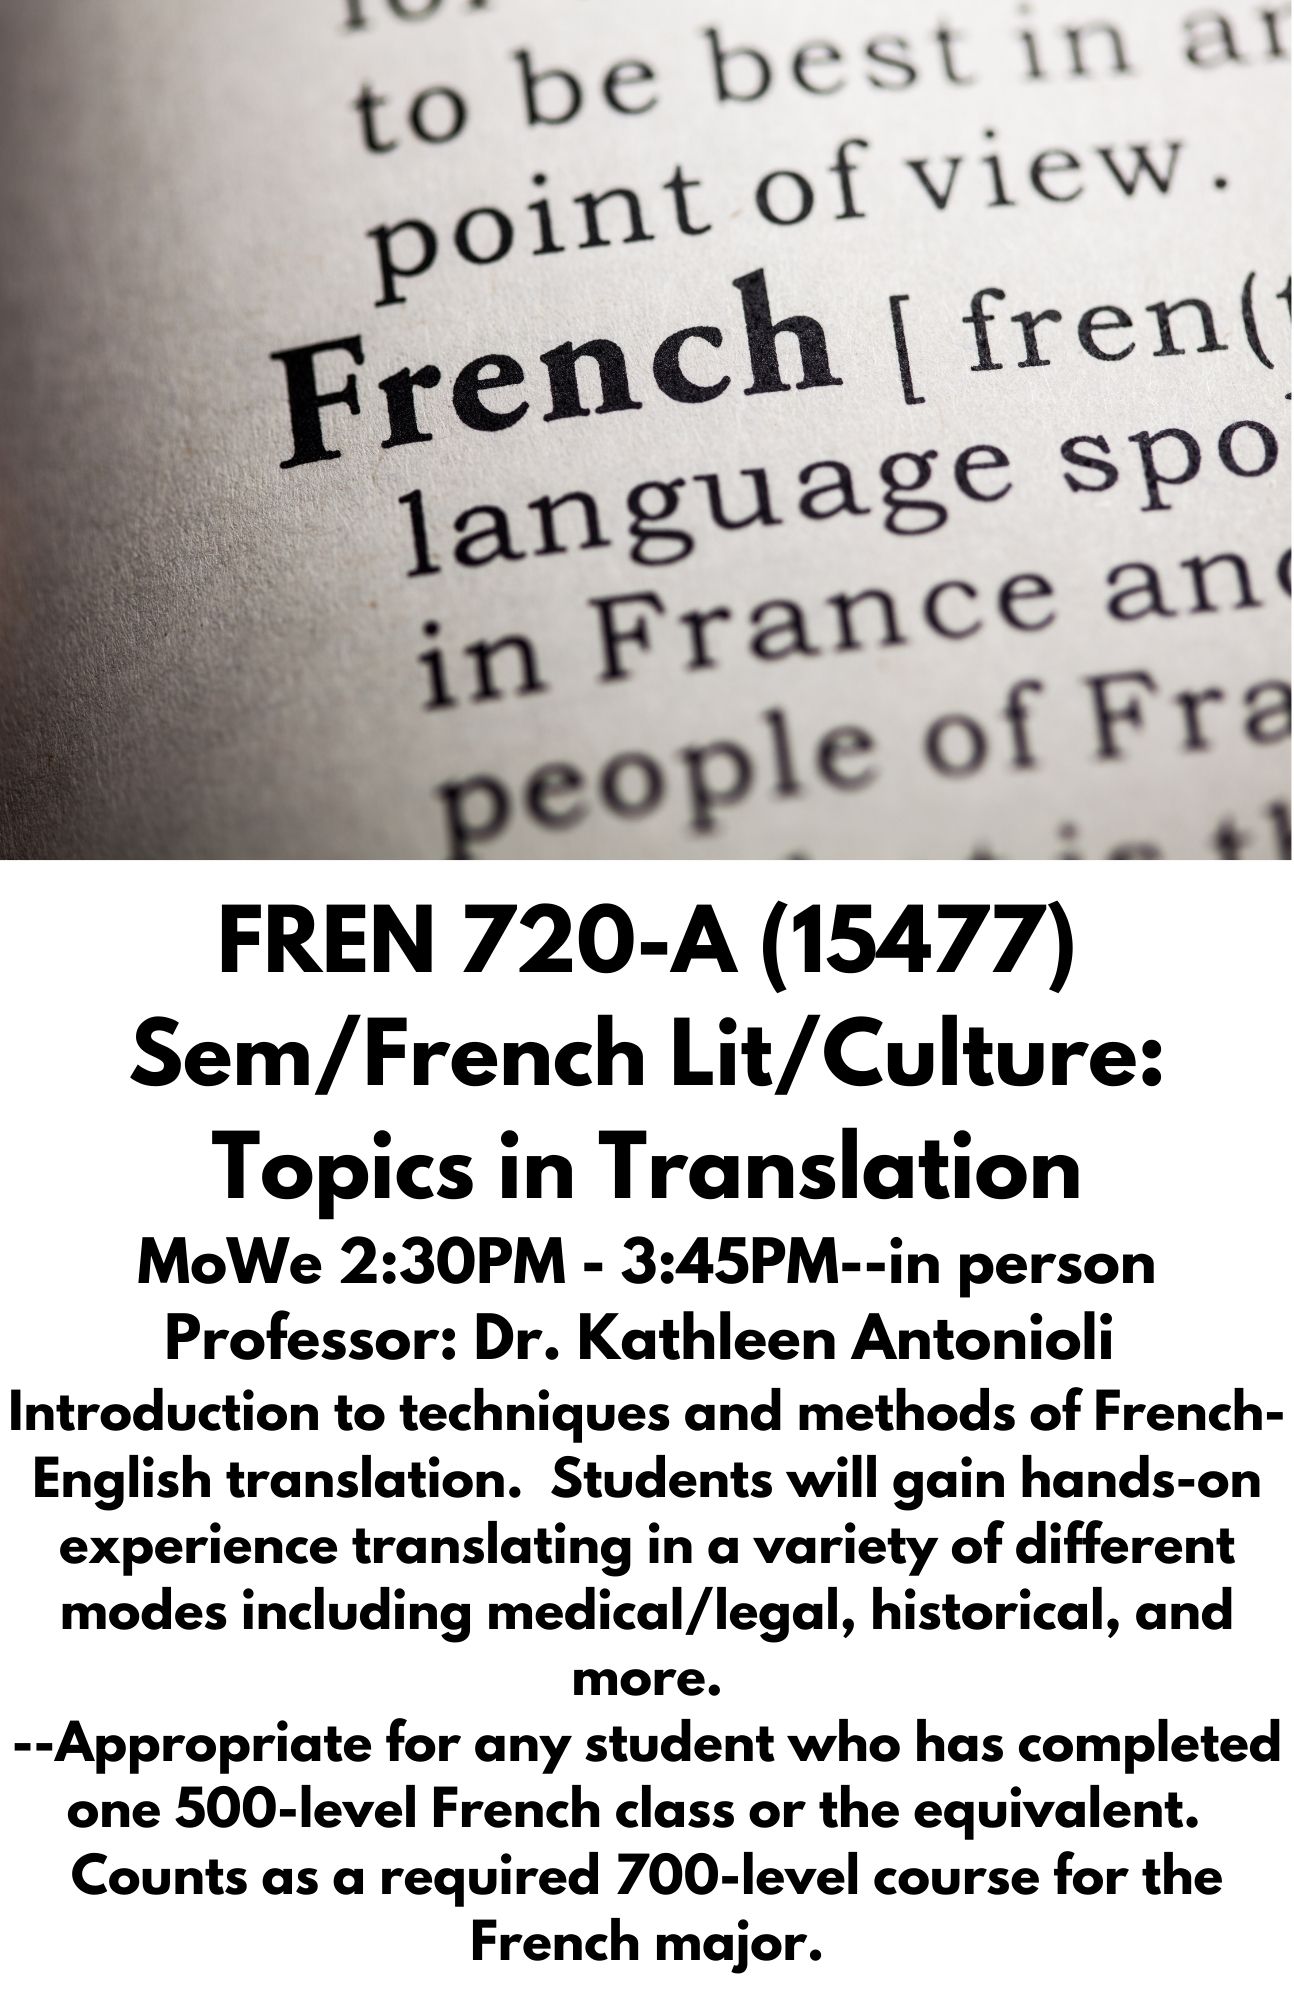 FREN 720-A (15477) Sem/French Lit/Culture: Topics in Translation MoWe 2:30PM - 3:45PM--in person Professor: Dr. Kathleen Antonioli  Introduction to techniques and methods of French-English translation.  Students will gain hands-on experience translating in a variety of different modes including medical/legal, historical, and more. --Appropriate for any student who has completed one 500-level French class or the equivalent.  Counts as a required 700-level course for the French major.